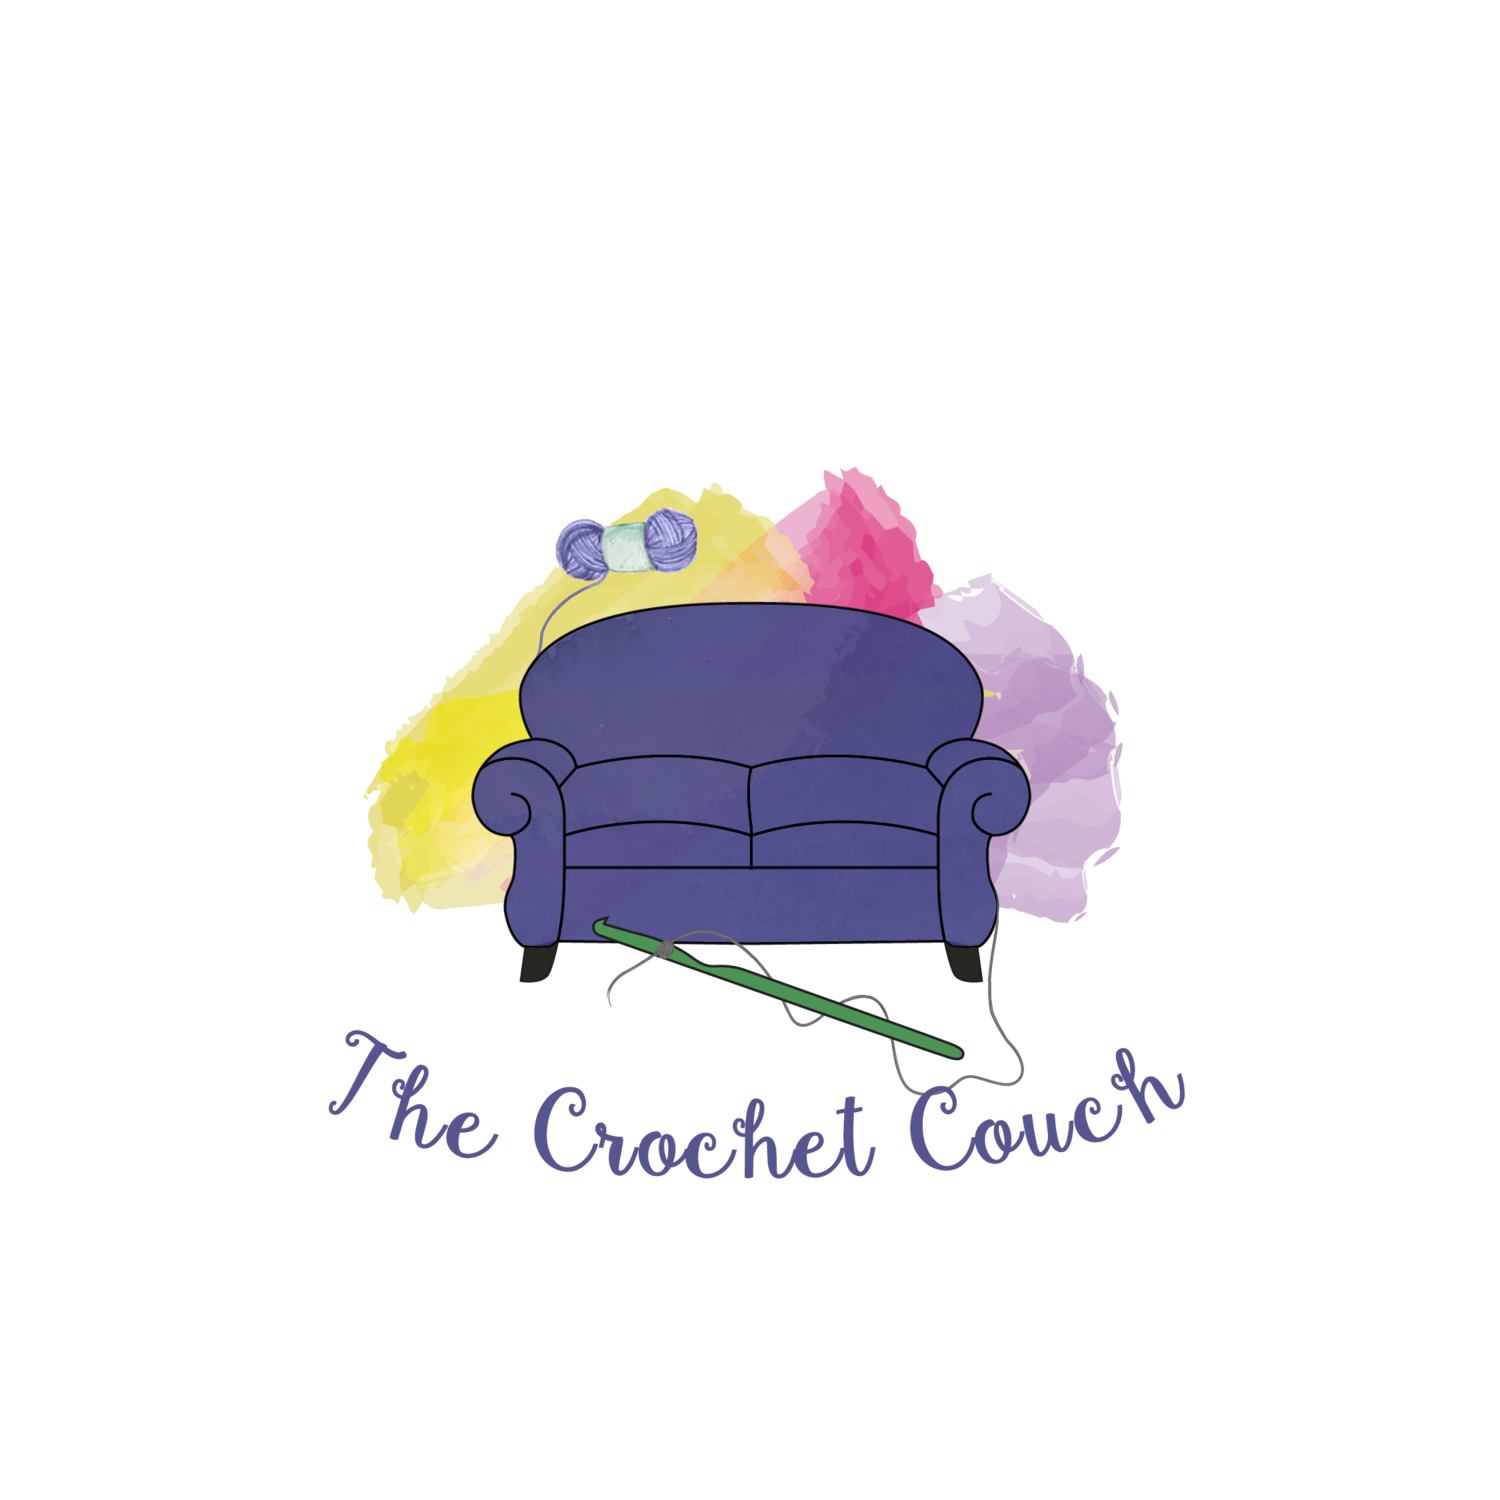 The Crochet Couch